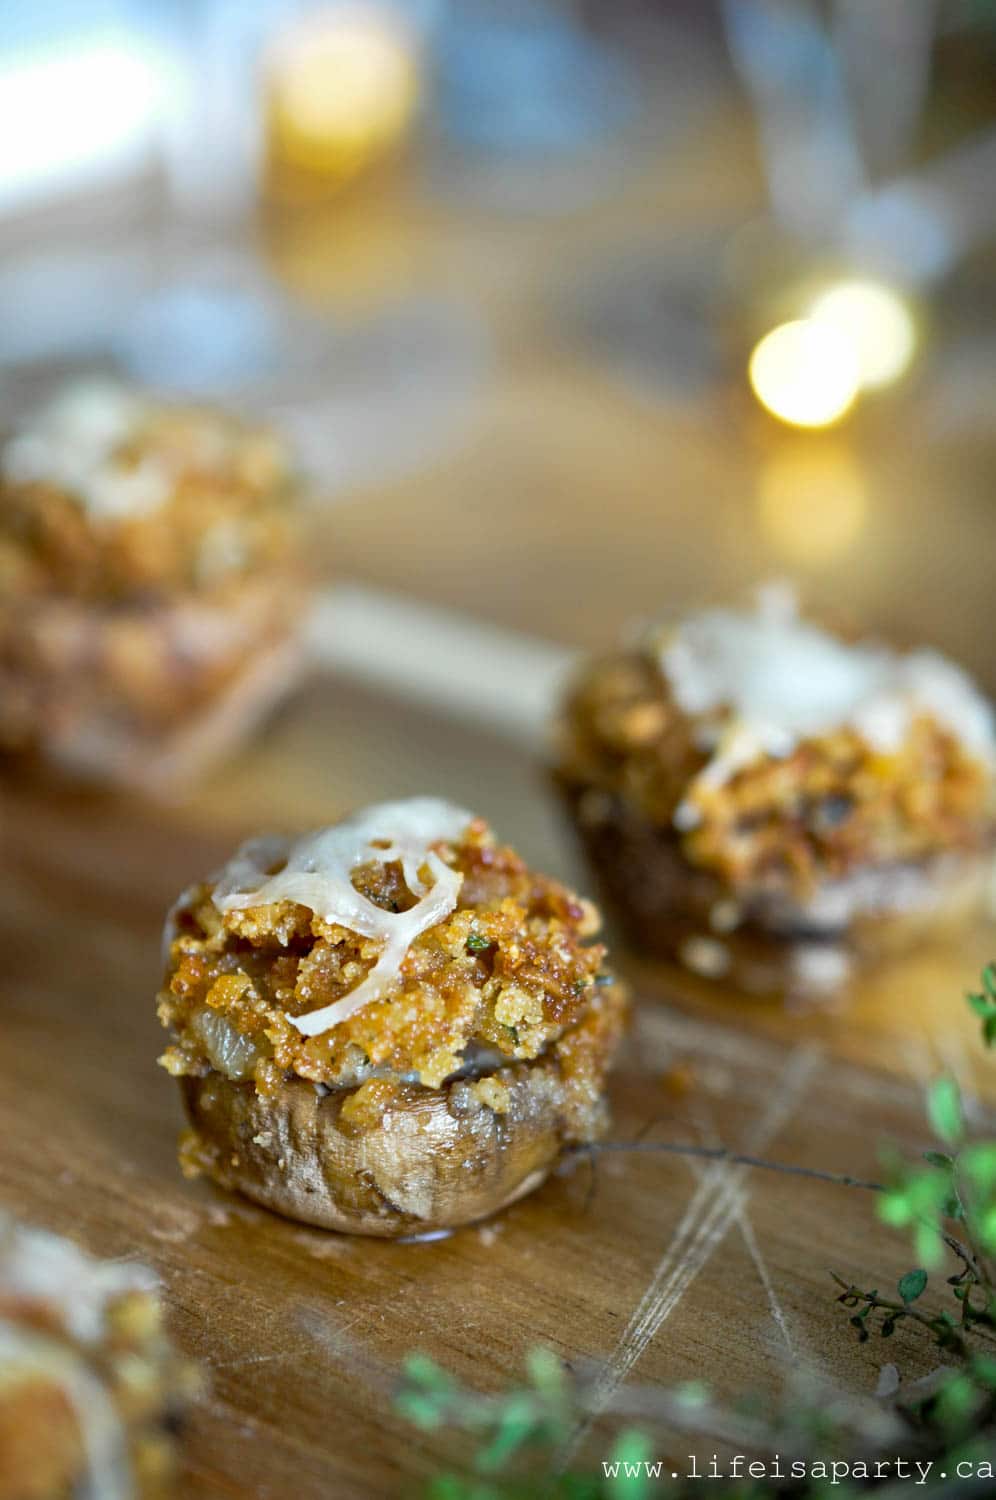 Stuffed Mushrooms -a simple, go-to, tested and true stuffed mushroom recipe perfect as an appetizer.